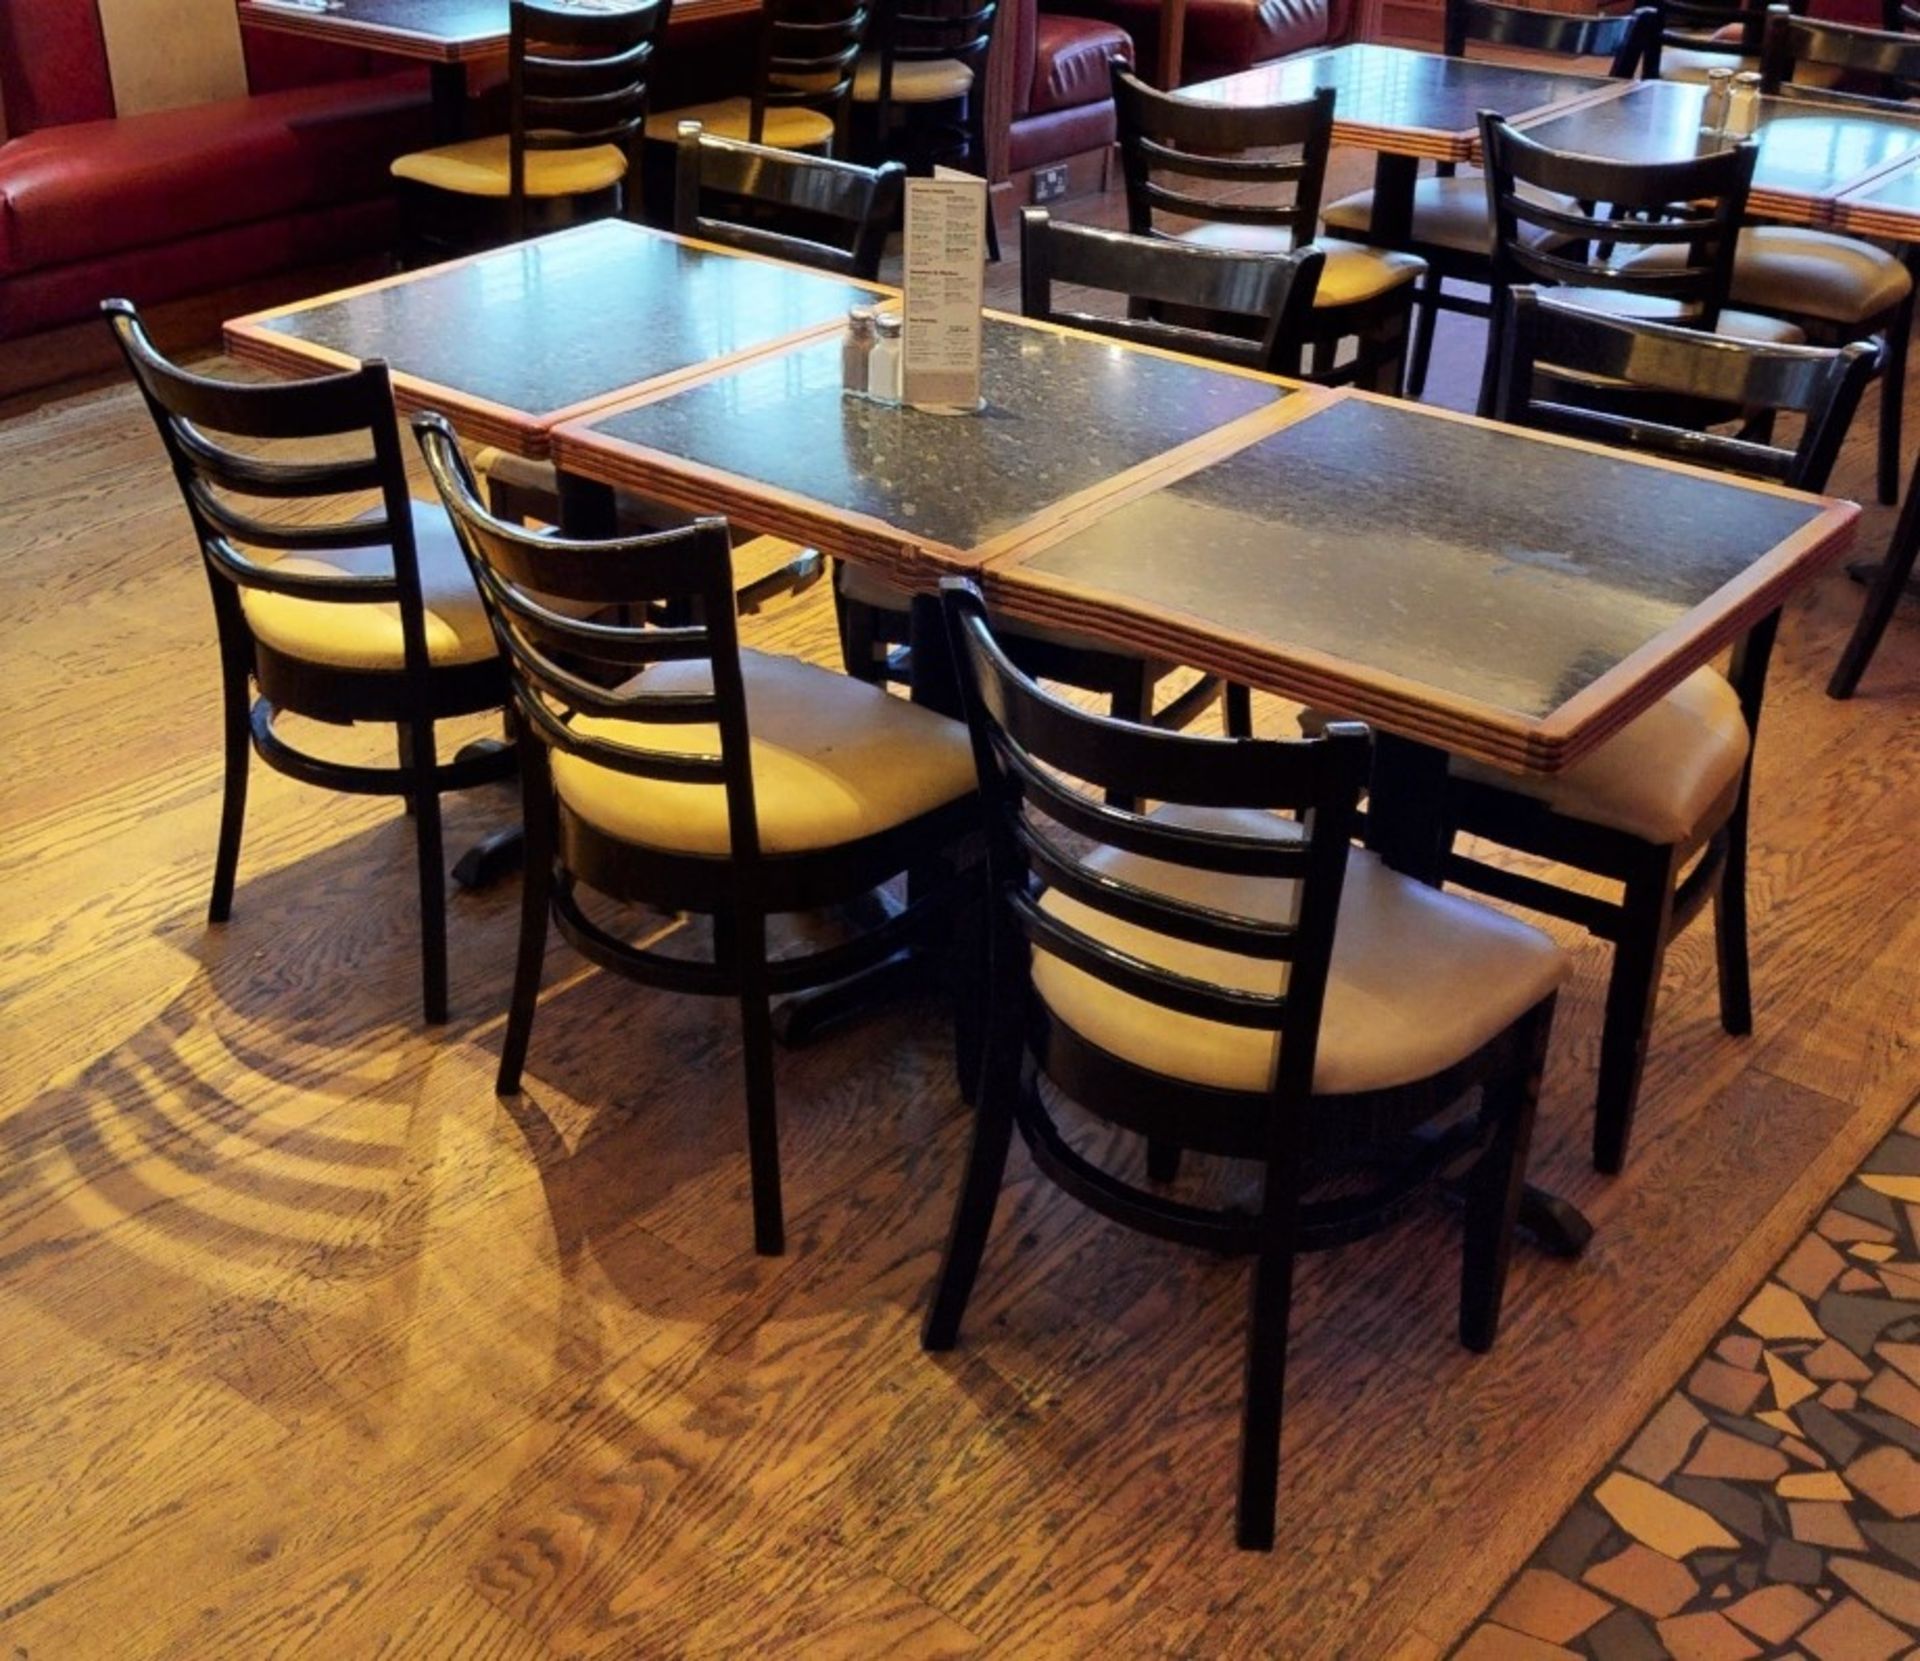 3 x Restaurant Tables With Granite Style Surface, Wooden Edging, Cast Iron Bases - Seats 2 Persons - Image 4 of 4